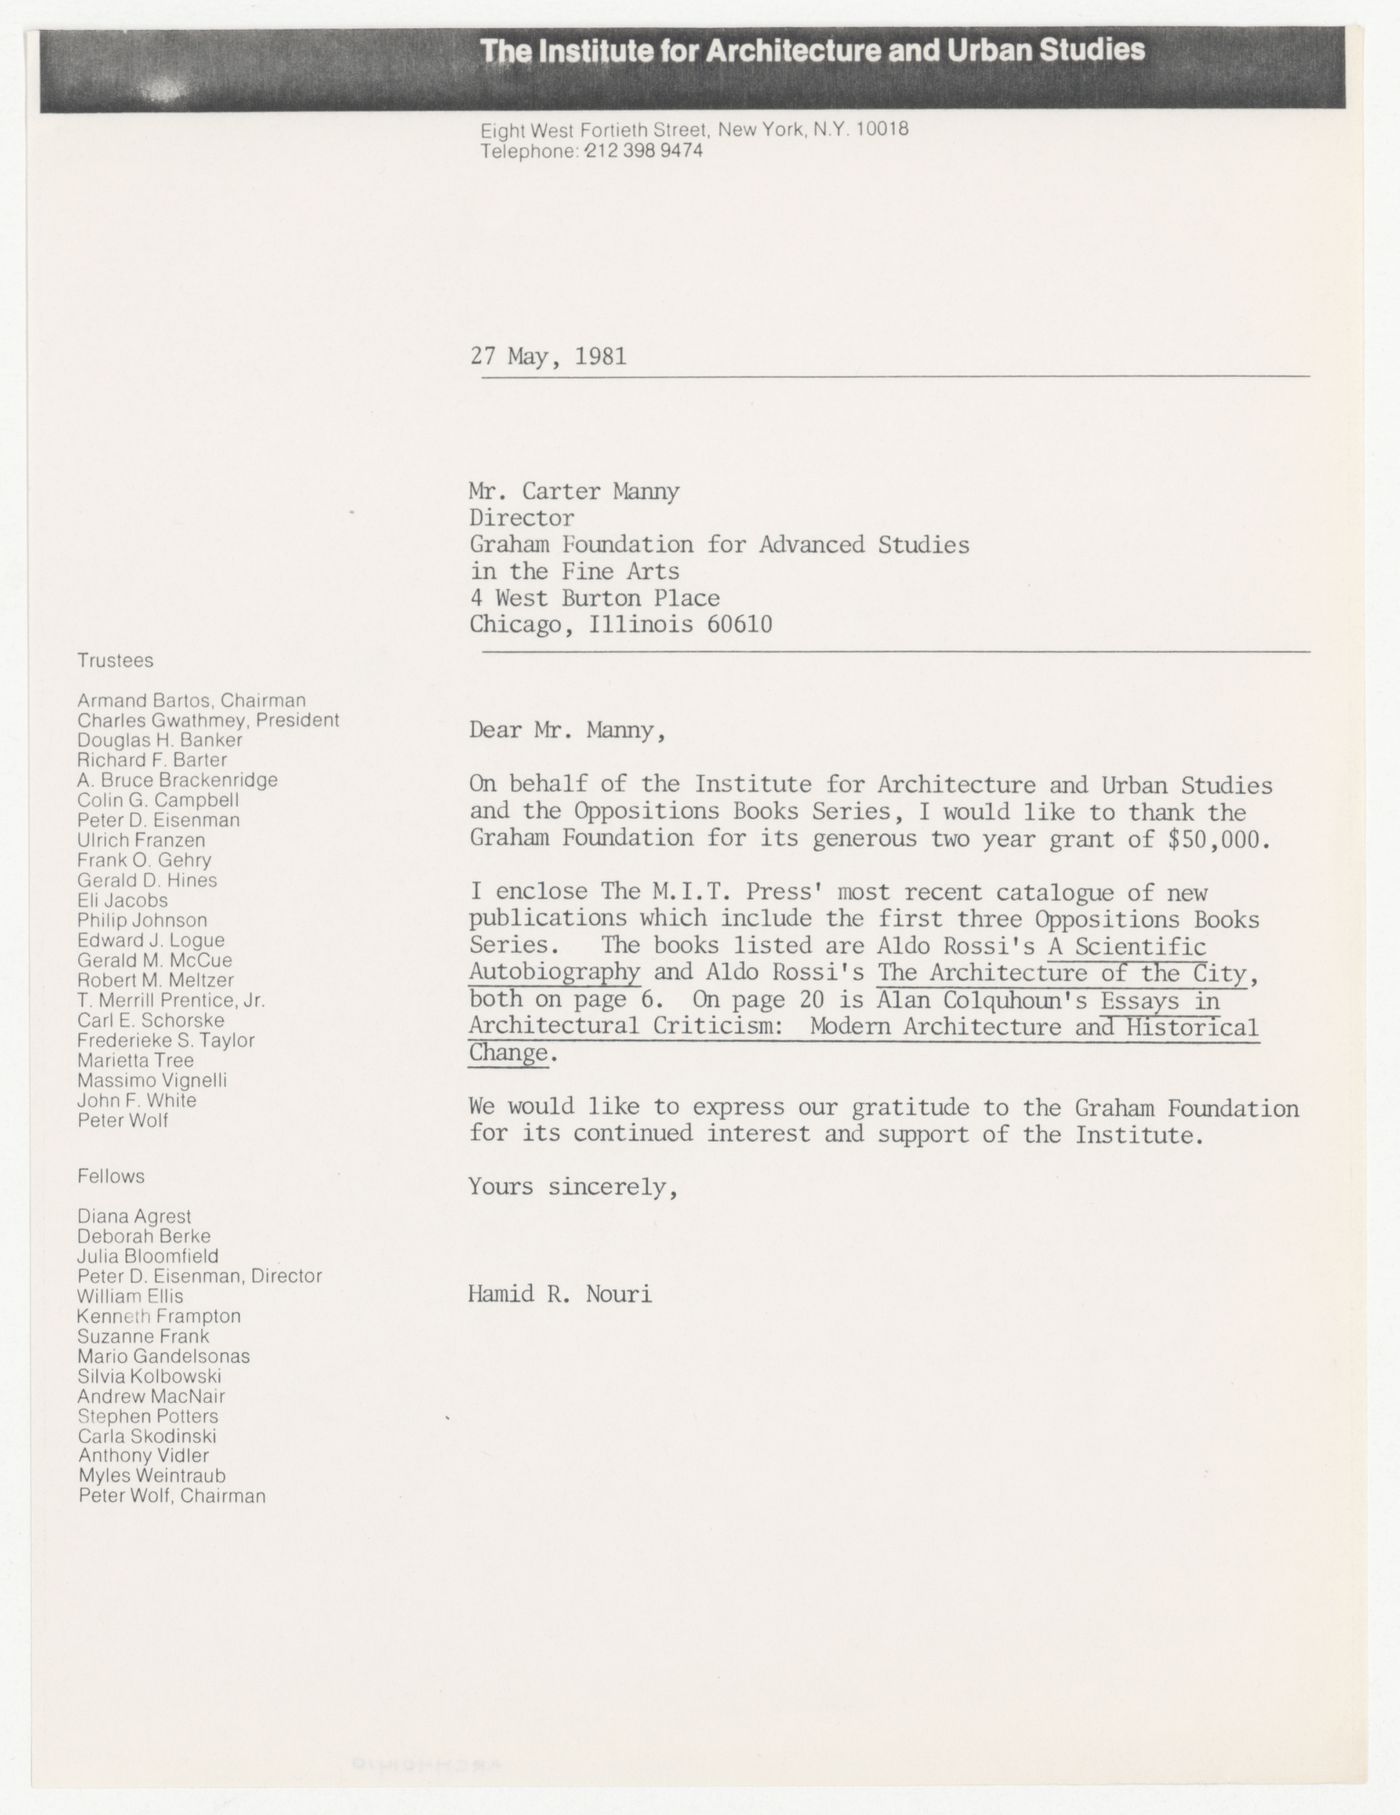 Letter from Hamid R. Nouri to Carter H. Manny Jr. acknowledging funding for Oppositions Books